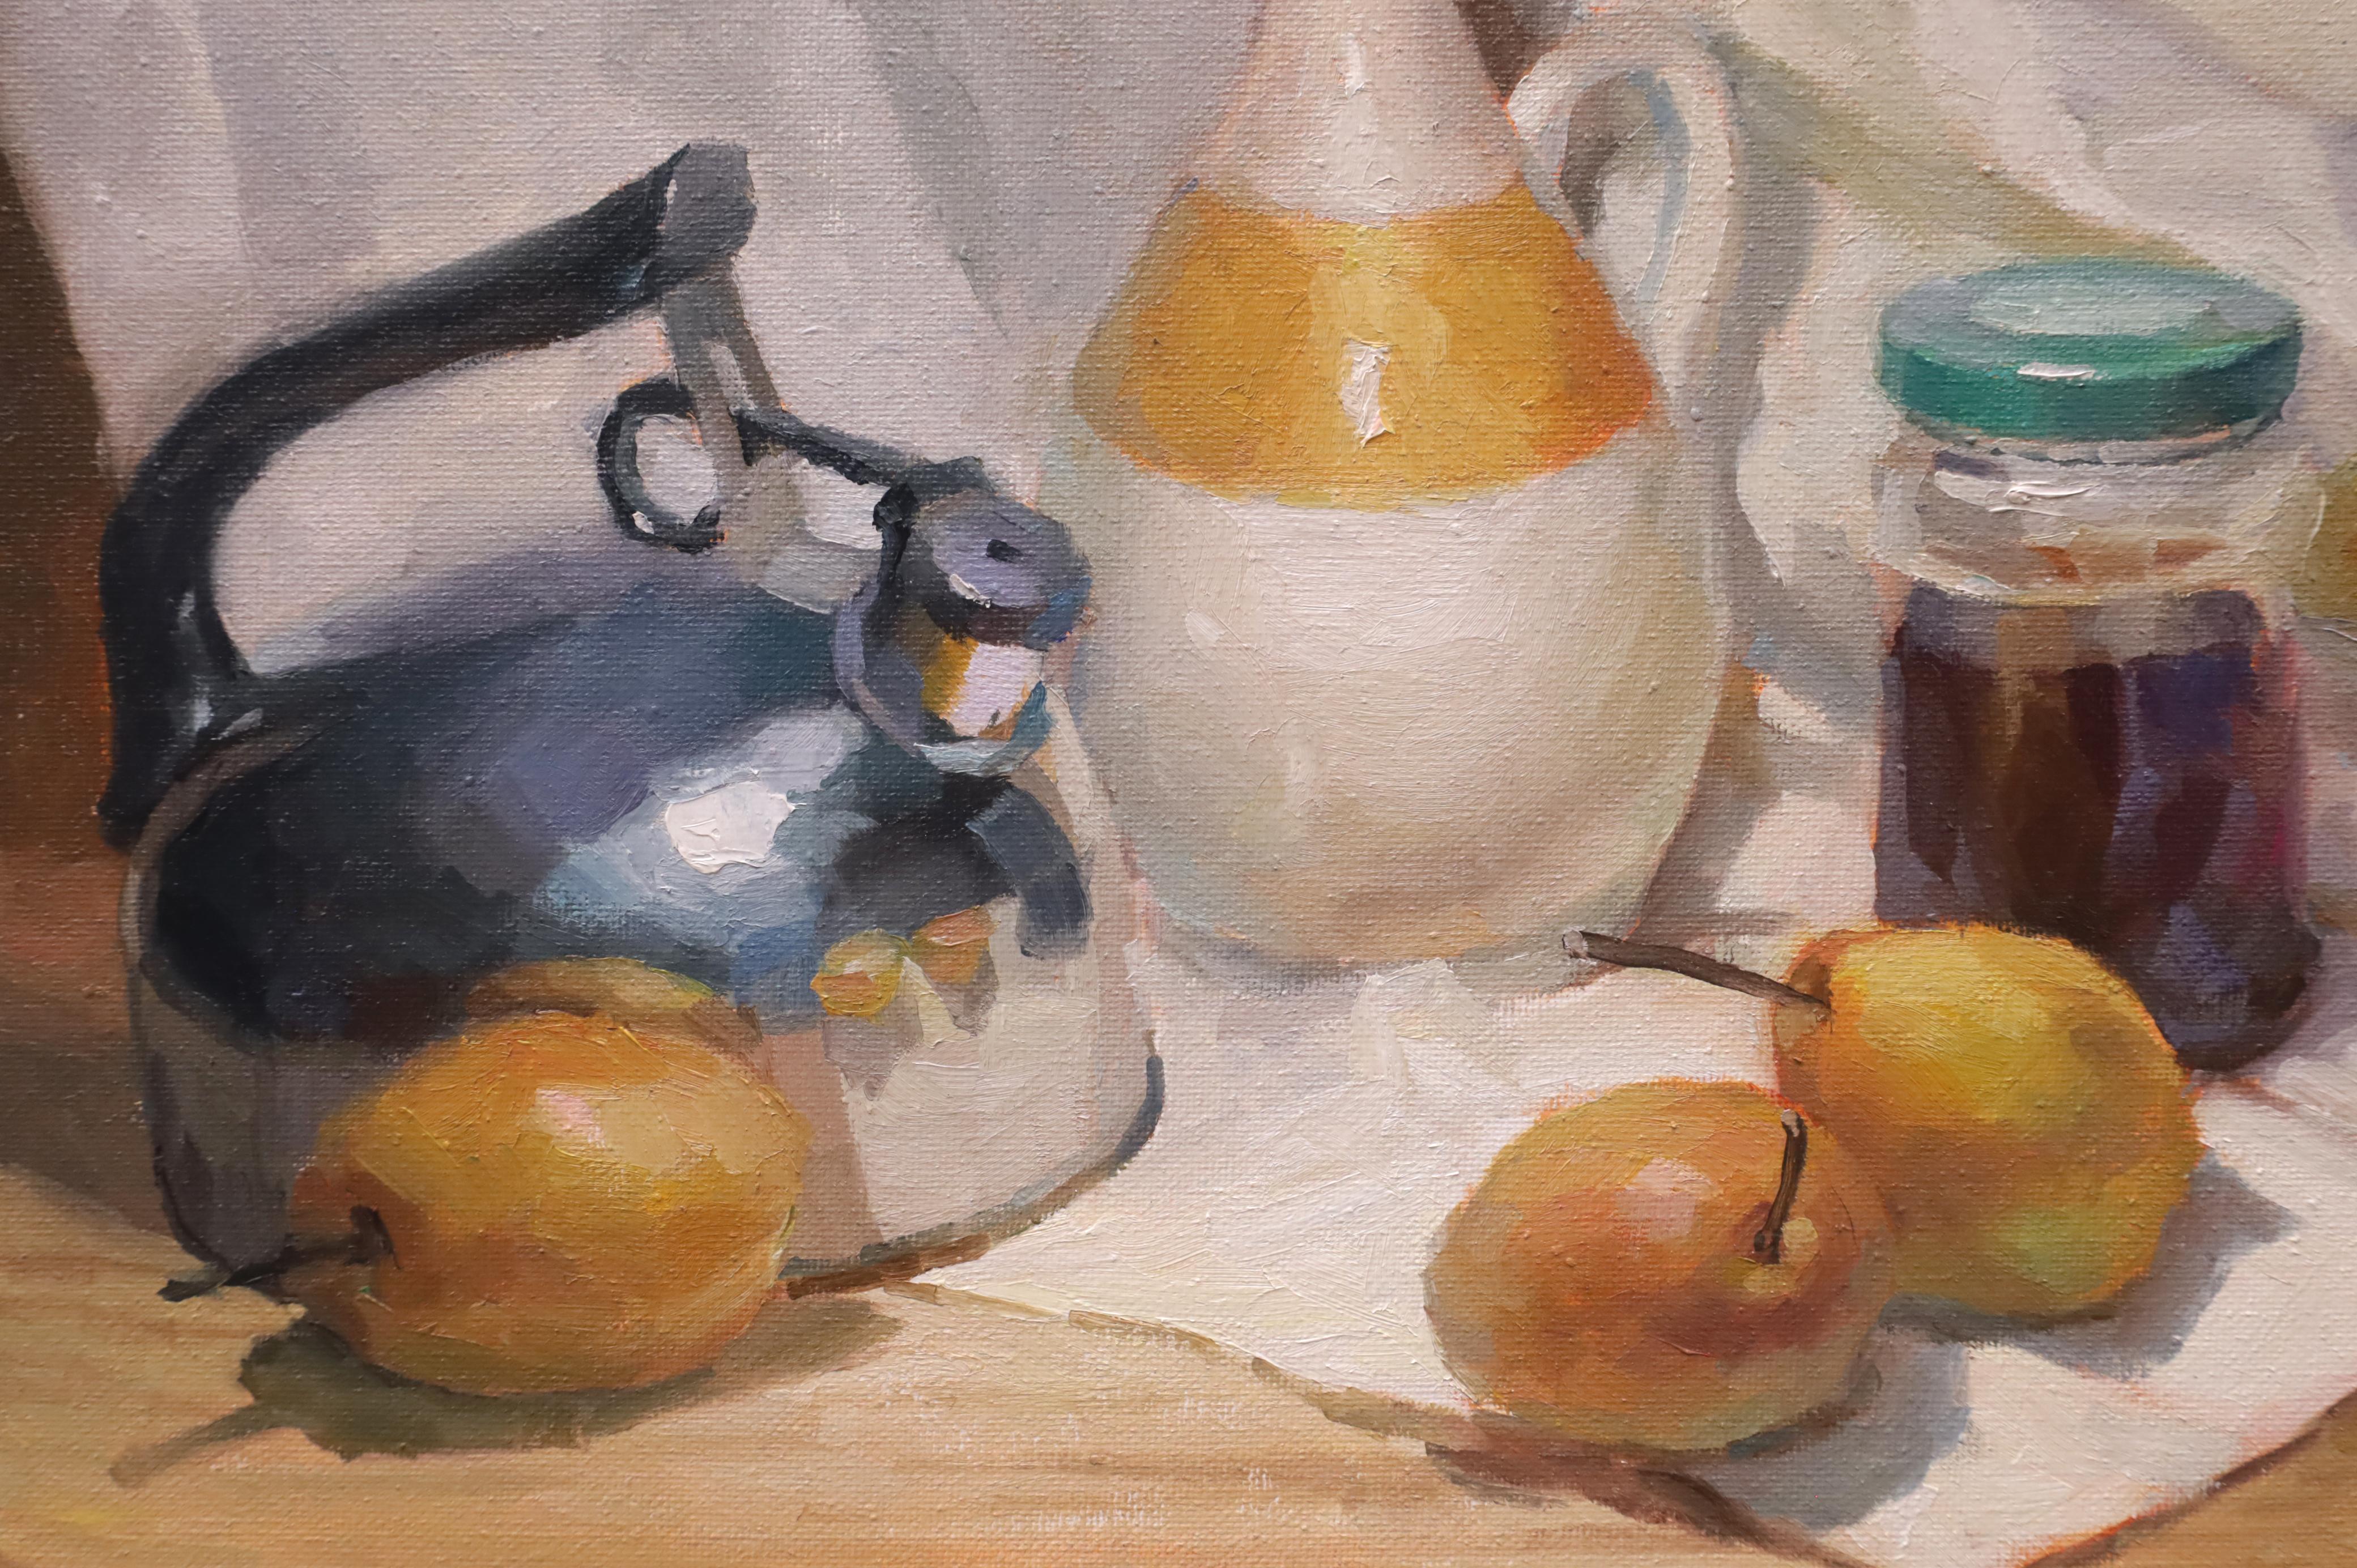 Pears and Containers, Oil Painting - Contemporary Art by Shuxing Fan